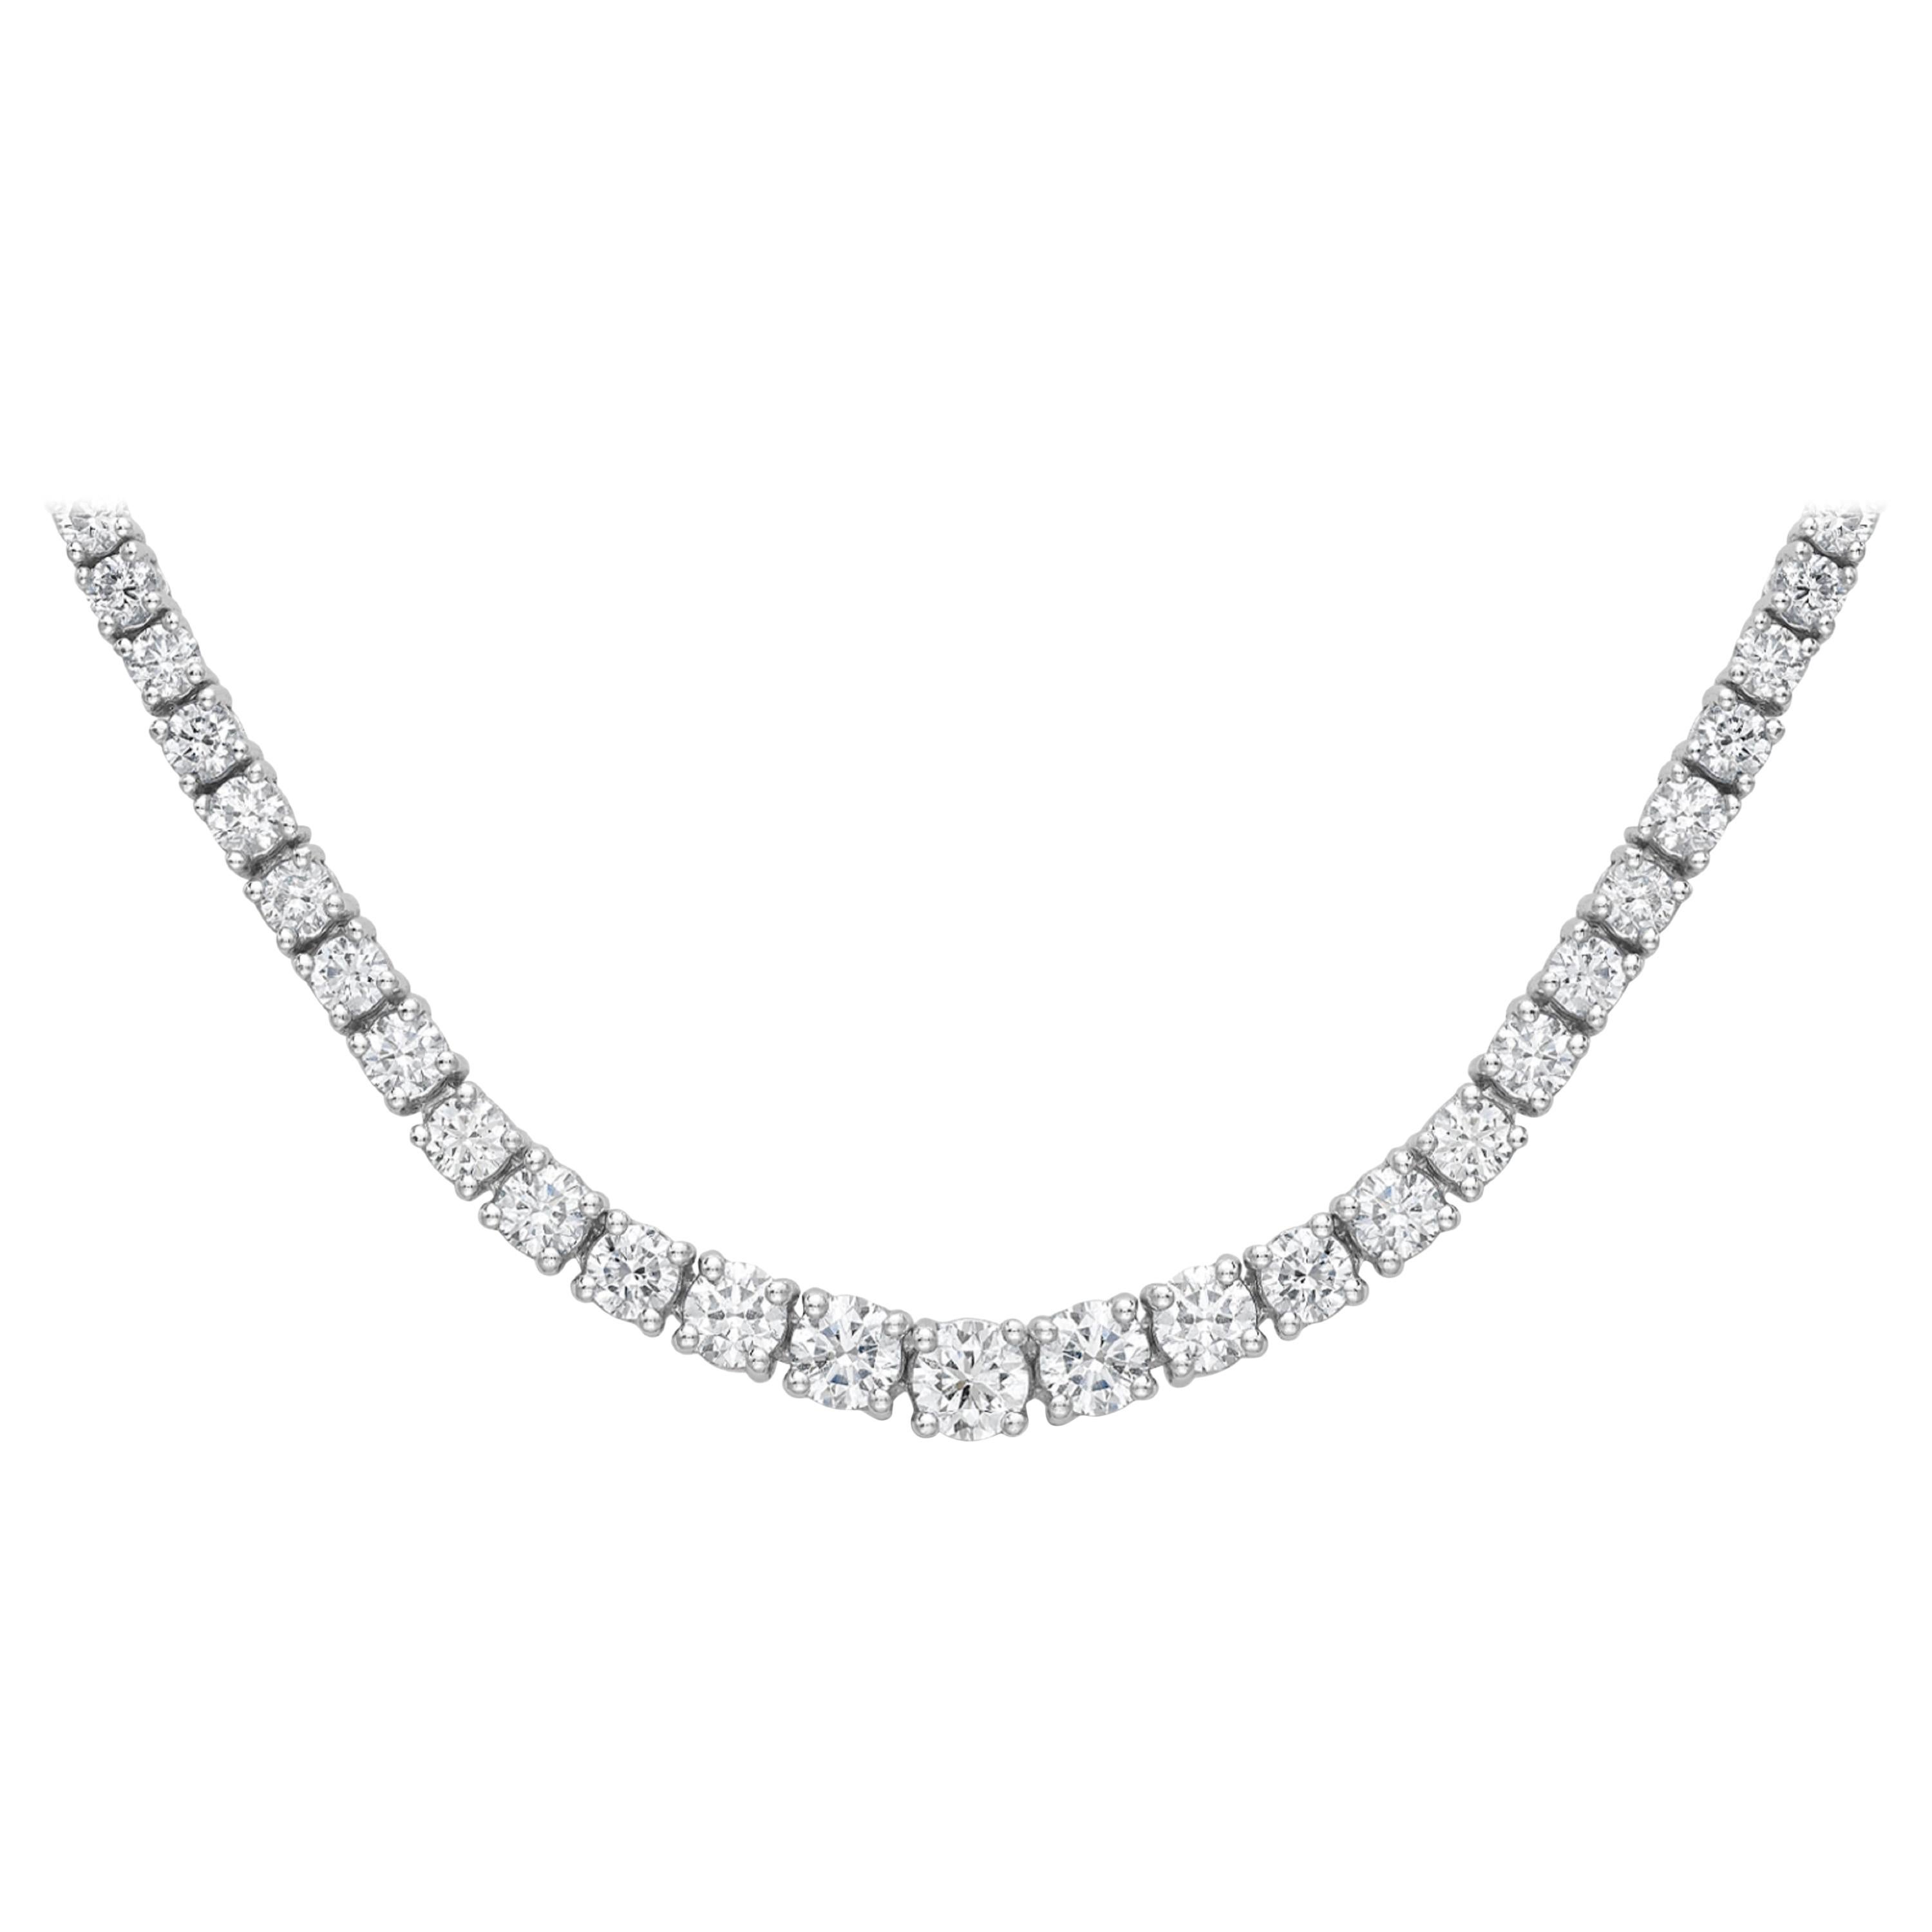 16 Carat Natural Untreated Diamond Tennis Necklace 18 Carat White Gold For Sale